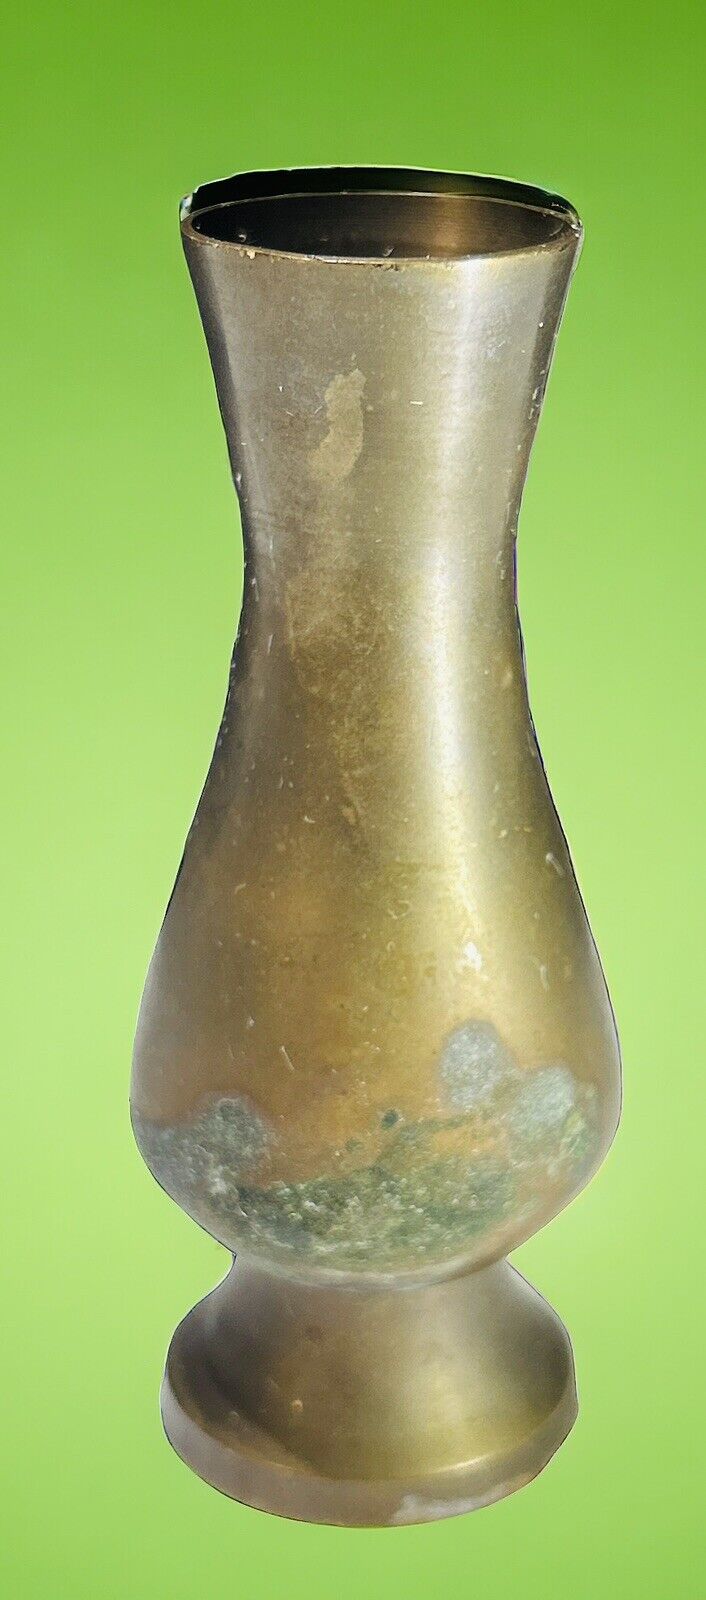 Vintage Solid Brass Bud Vase With Green Patina 3.75 Inches  Tall (Unmarked).